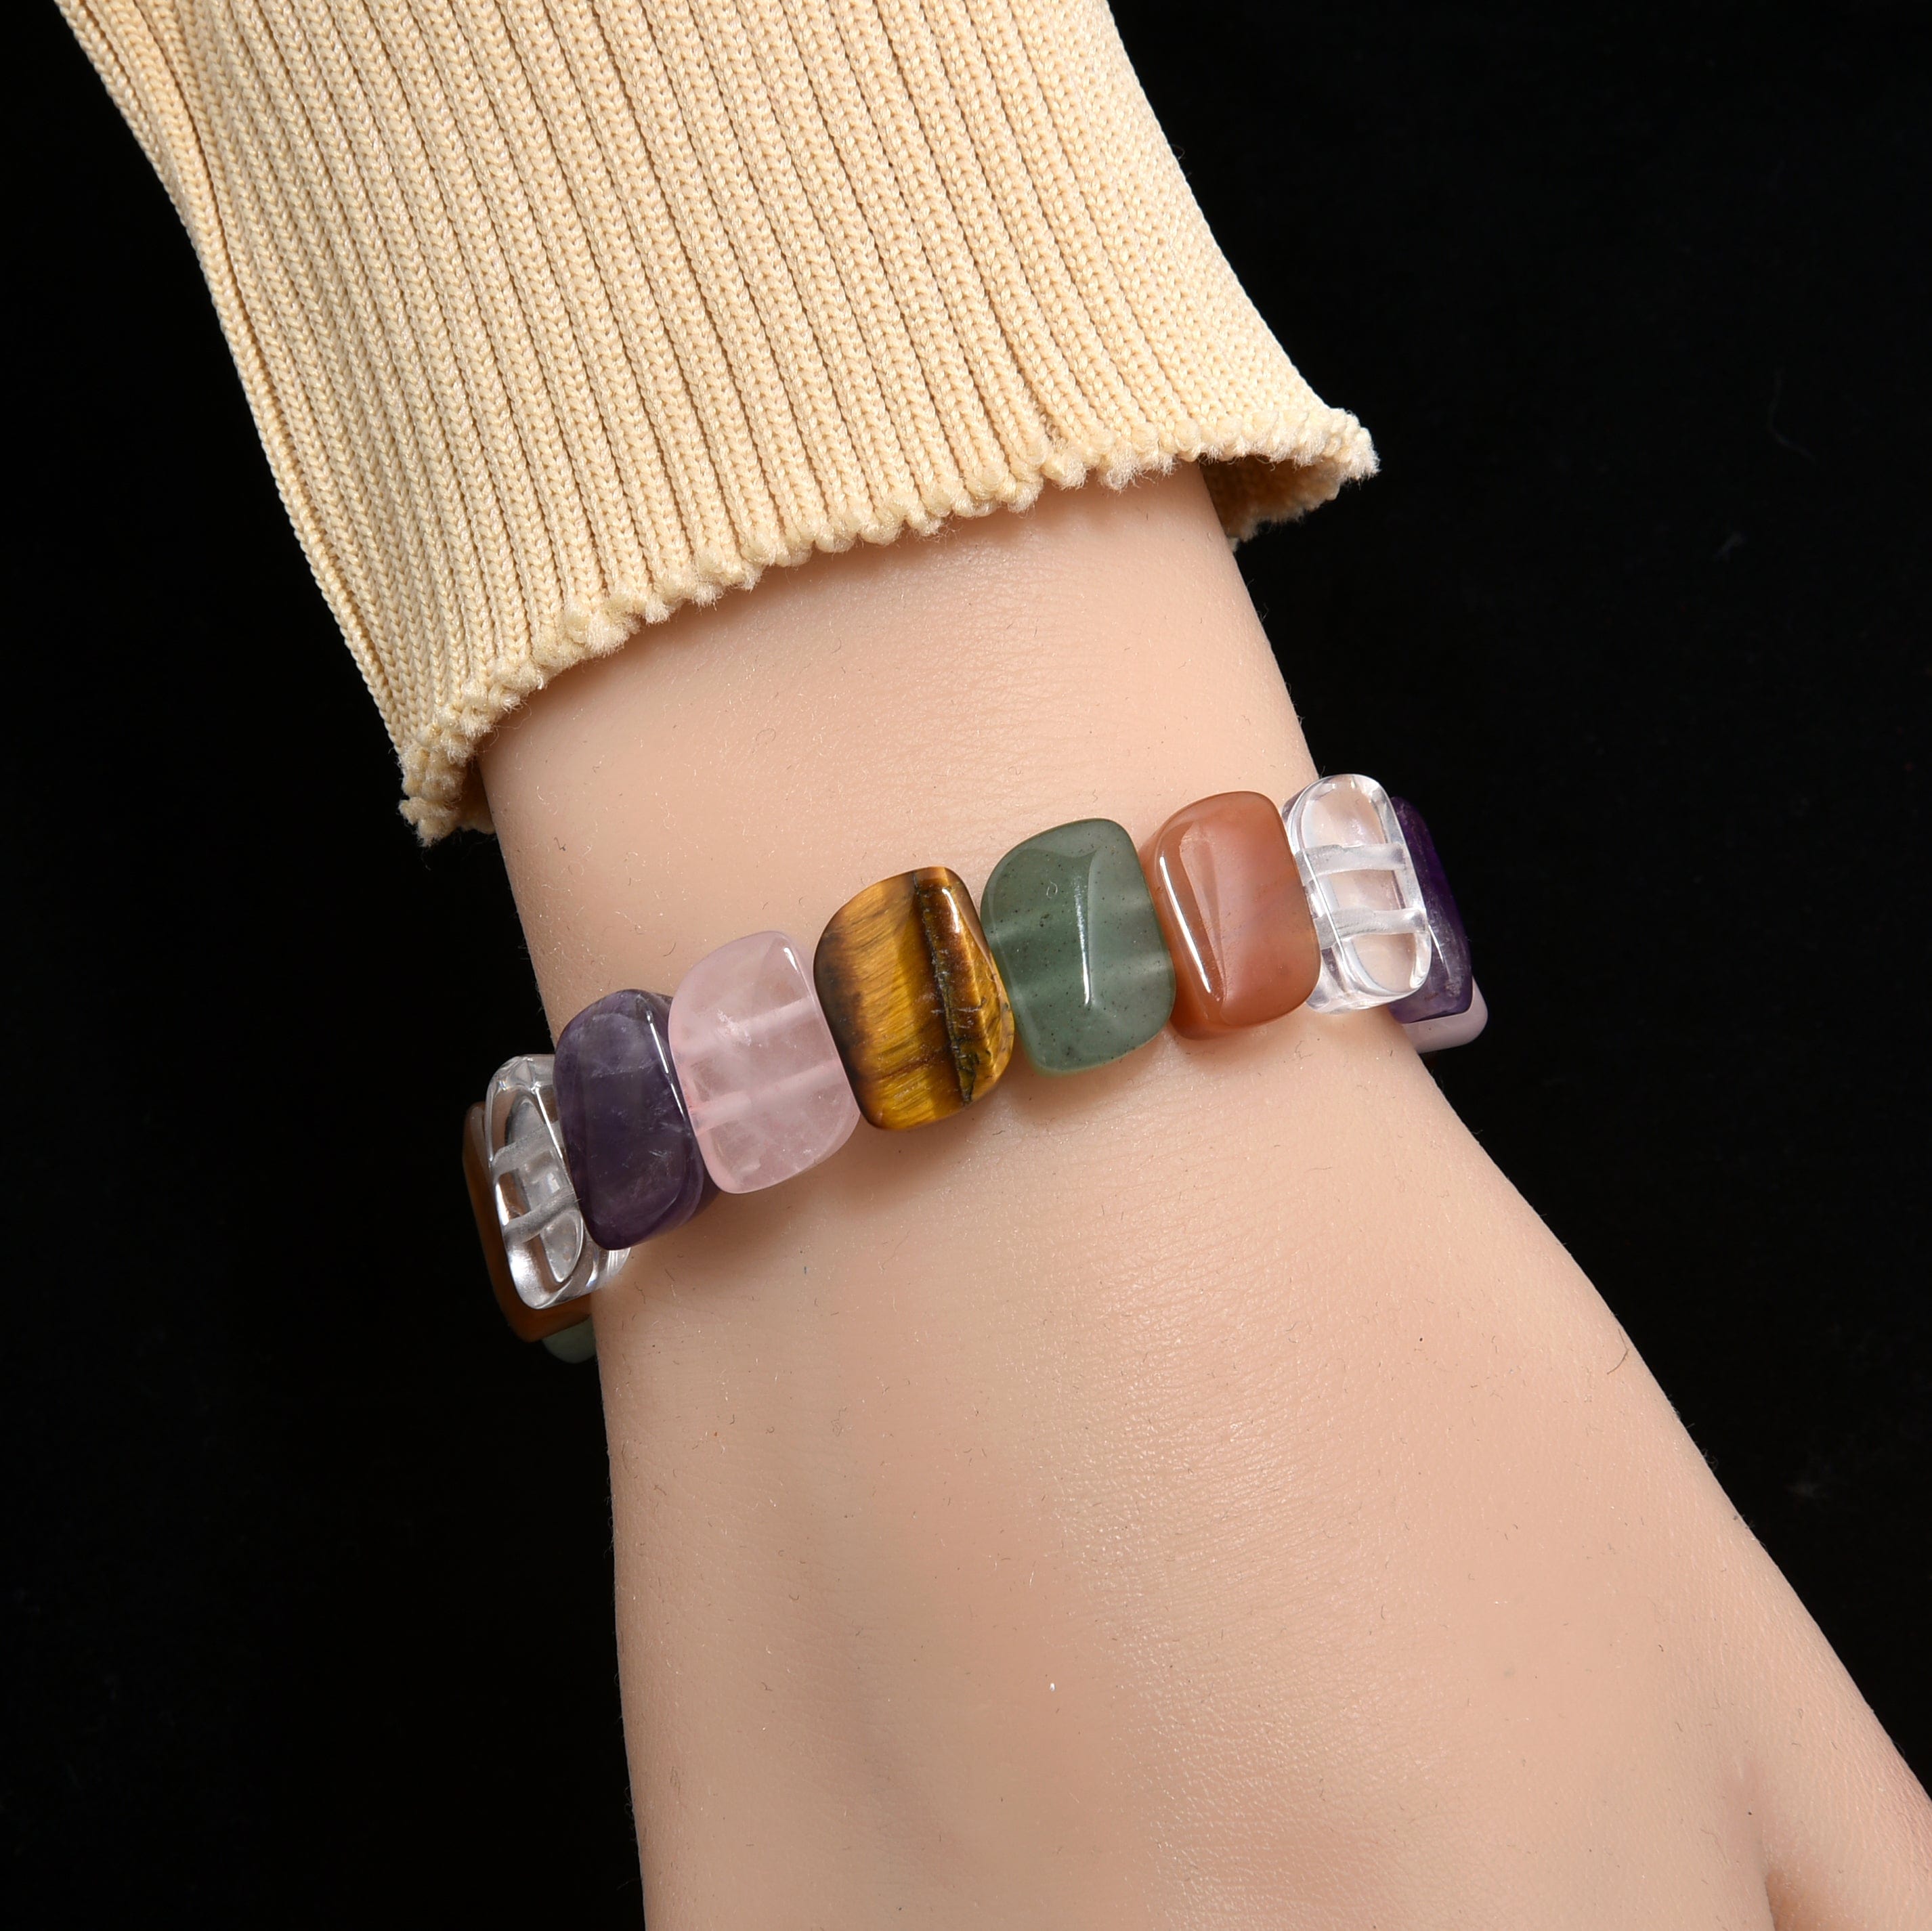 Benefits Of Natural Stone Bracelets - TIAS COLLECTION